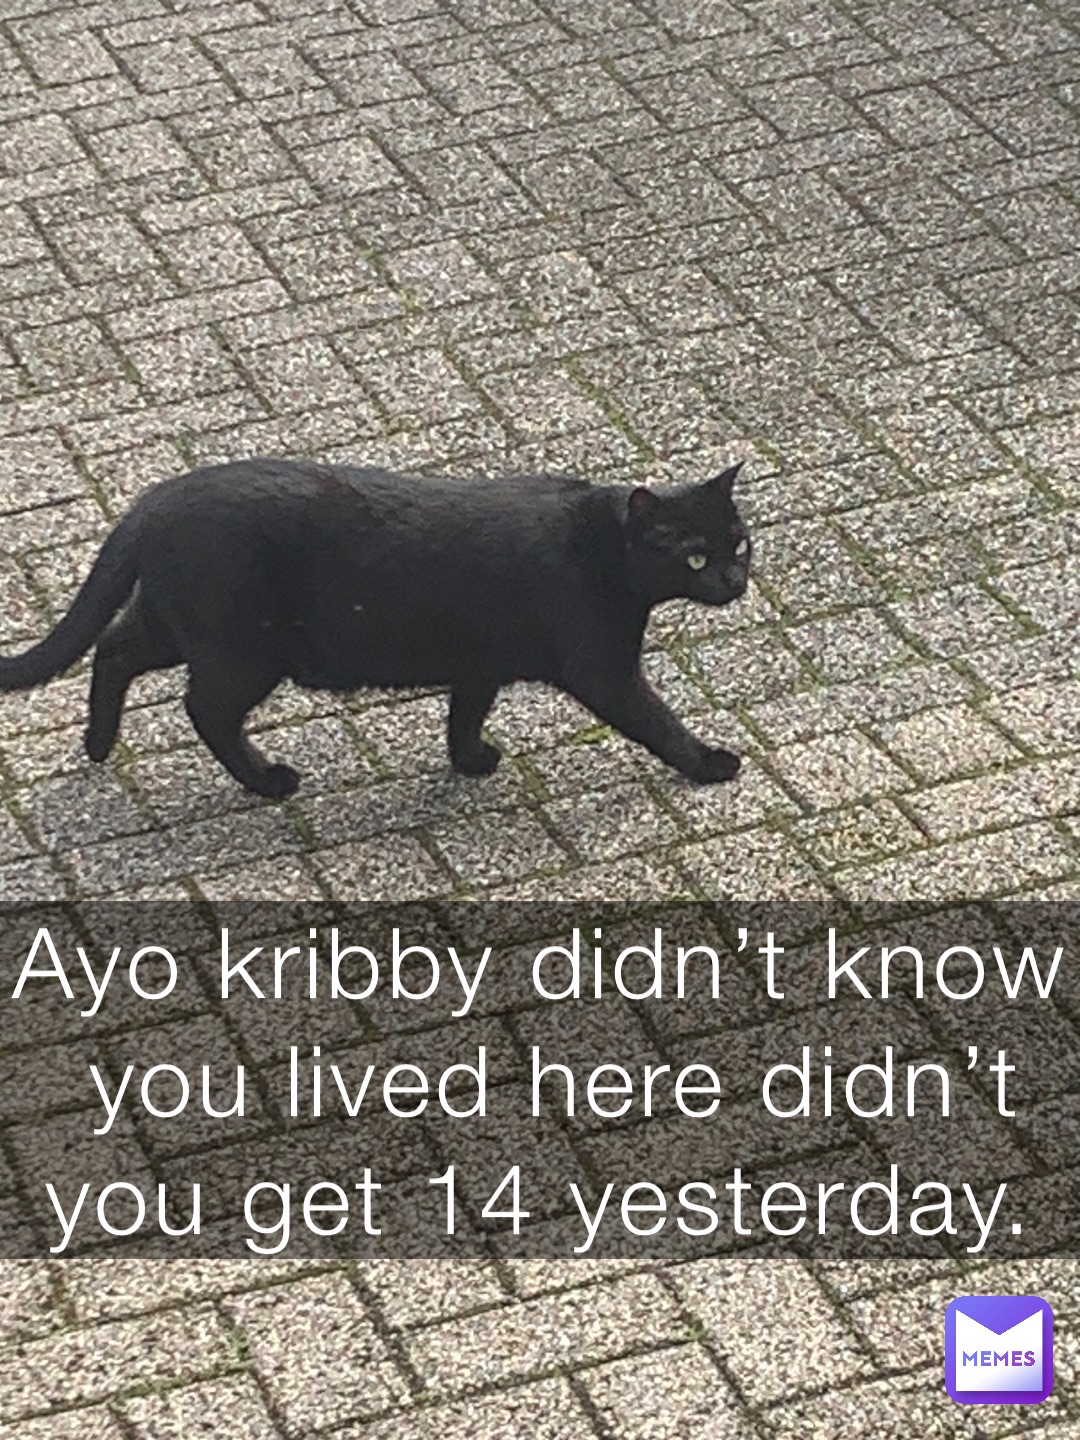 Ayo kribby didn’t know you lived here didn’t you get 14 yesterday.